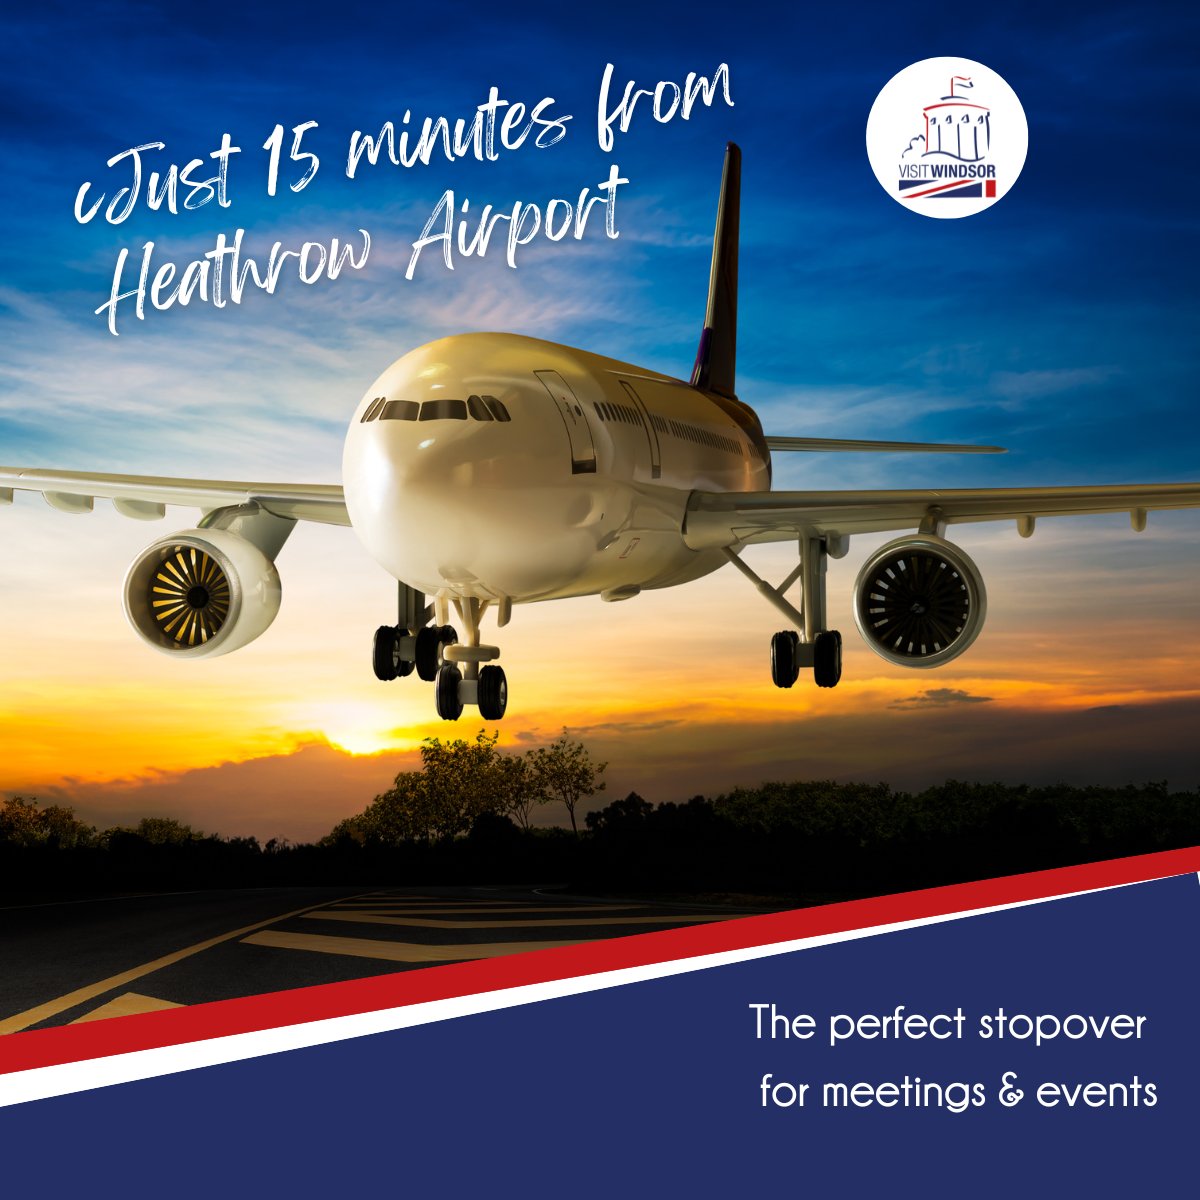 Convenient access from London by car, bus or train. We’re a 15-minute journey from Heathrow and close to the M25 and M4 motorways. Sign up to our e-news for event and conference bookers here: bit.ly/MICEenews
#royalconnections #royalwindsor #eventprofs